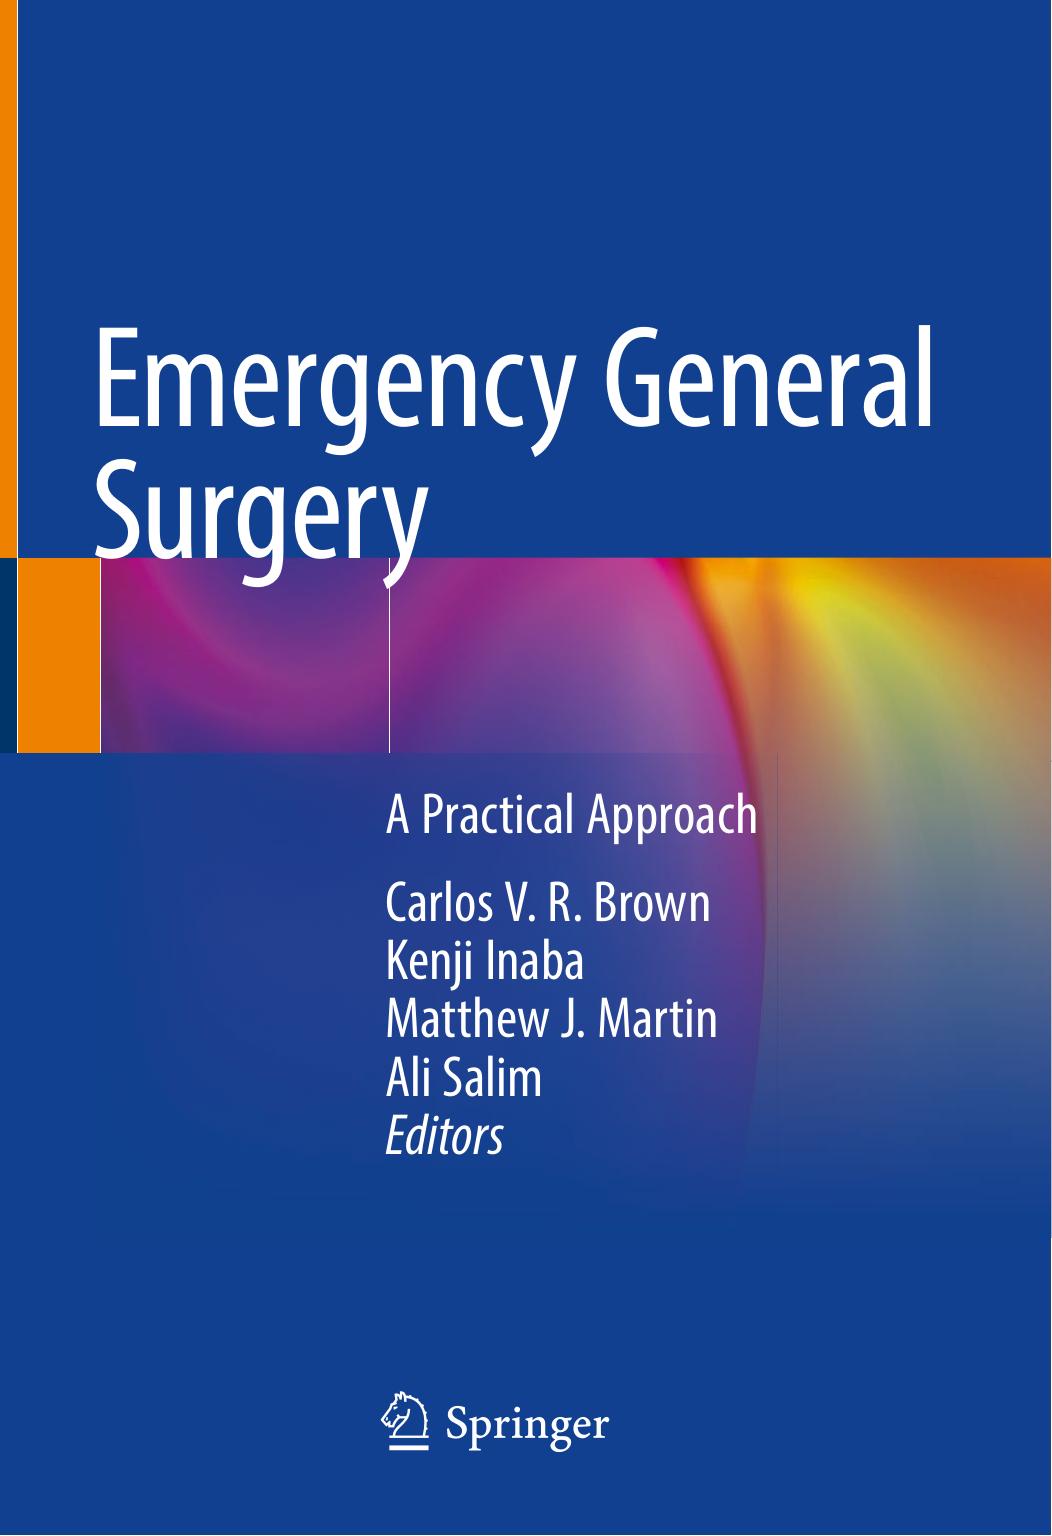 Emergency General Surgery  A Practical Approach ( PDFDrive.com )